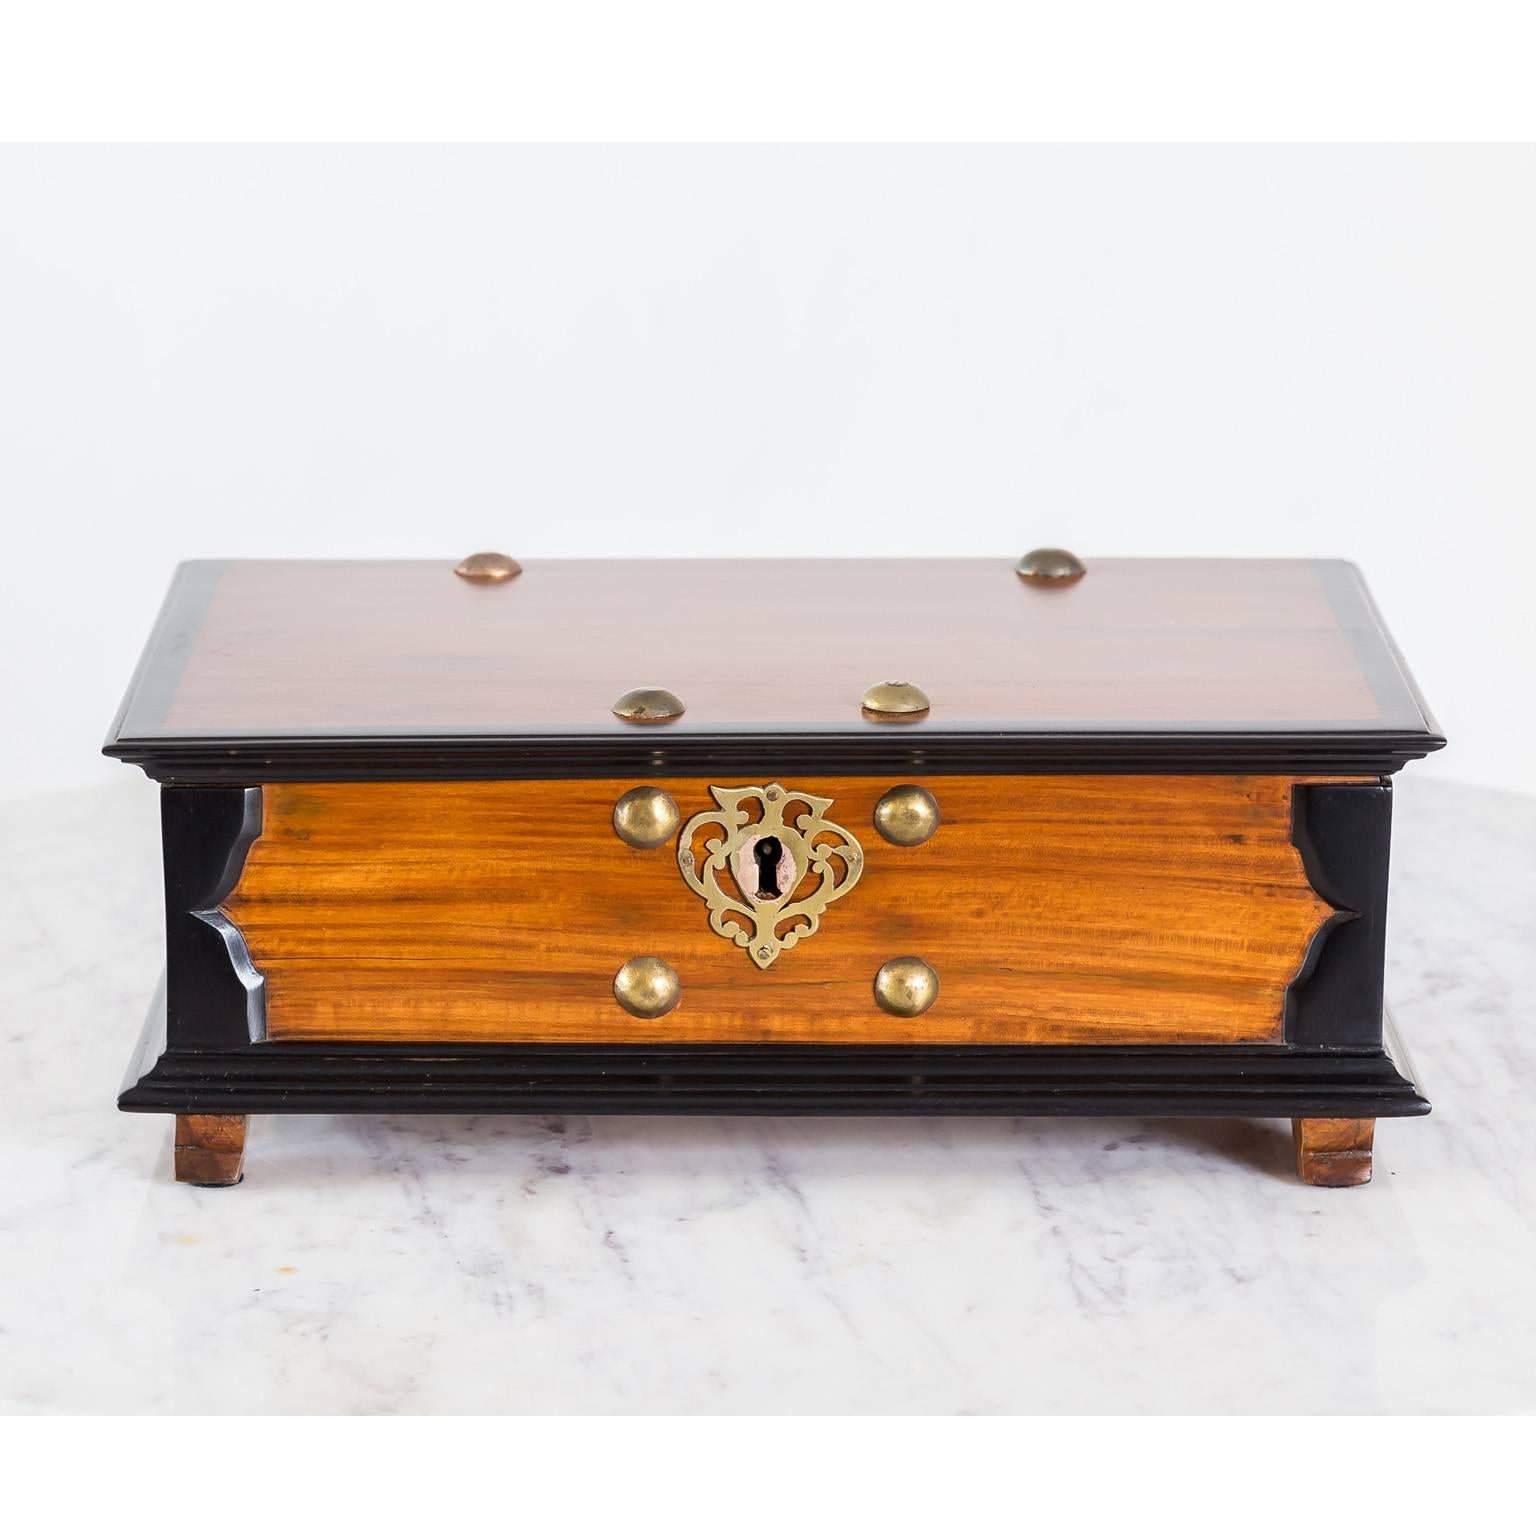 A beautiful Dutch colonial storage box made of nicely contrasting satinwood and ebony. On the sides as well as on the overlapping top and base, the box has a deep moulded ebony edge. The sides have cast bail lift handles against a pierced brass back